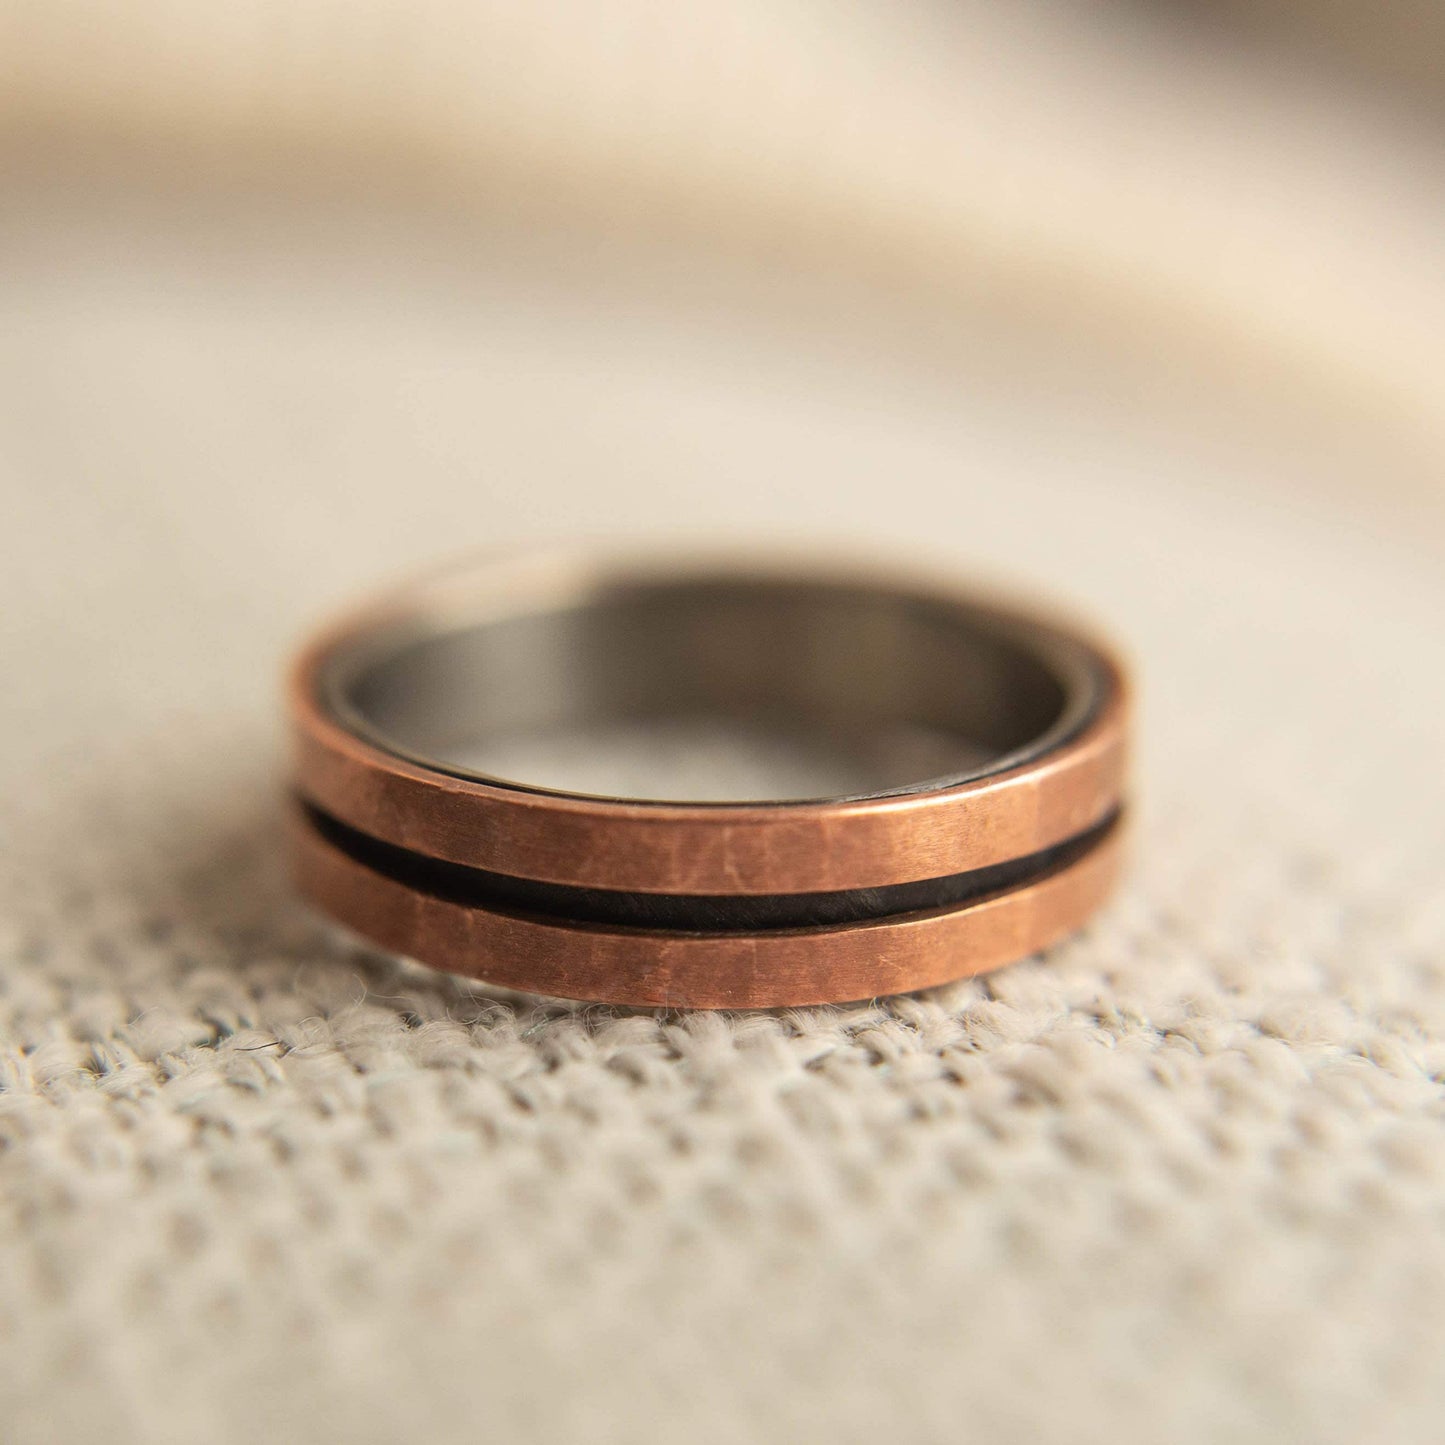 Mens Copper Wedding Band. This photo shows a lightly faceted dual copper ring with a black zirconium liner. (Horizontal with cloth background)